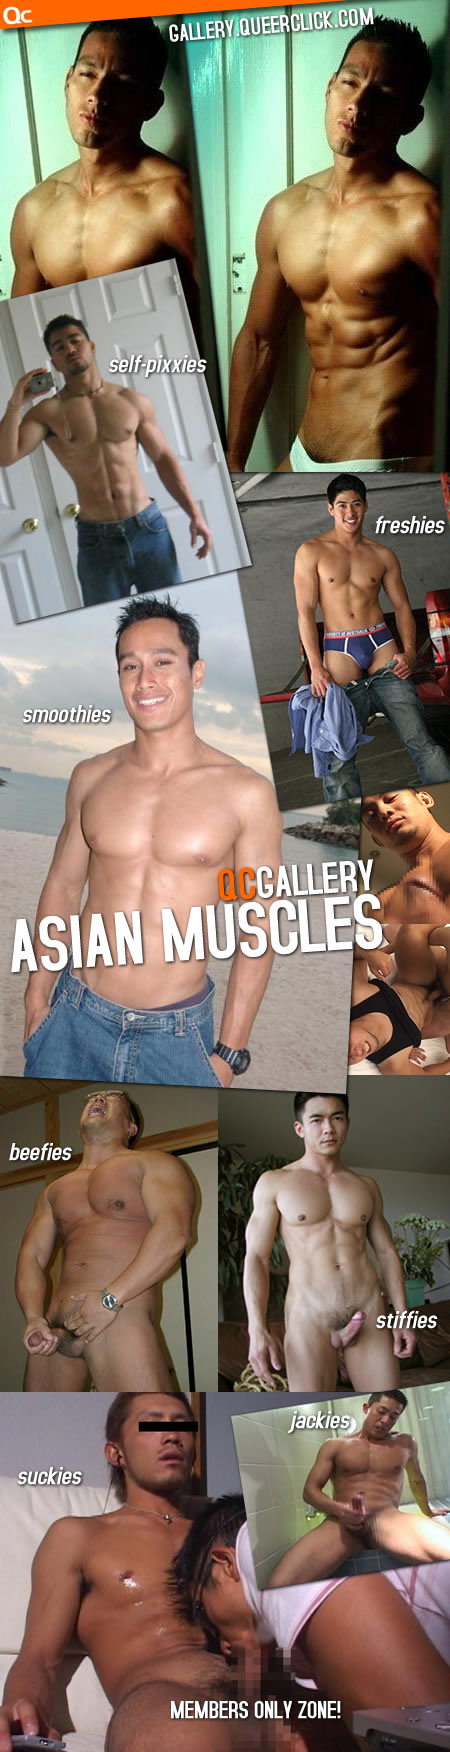 Asian Muscles @ QueerClick Gallery